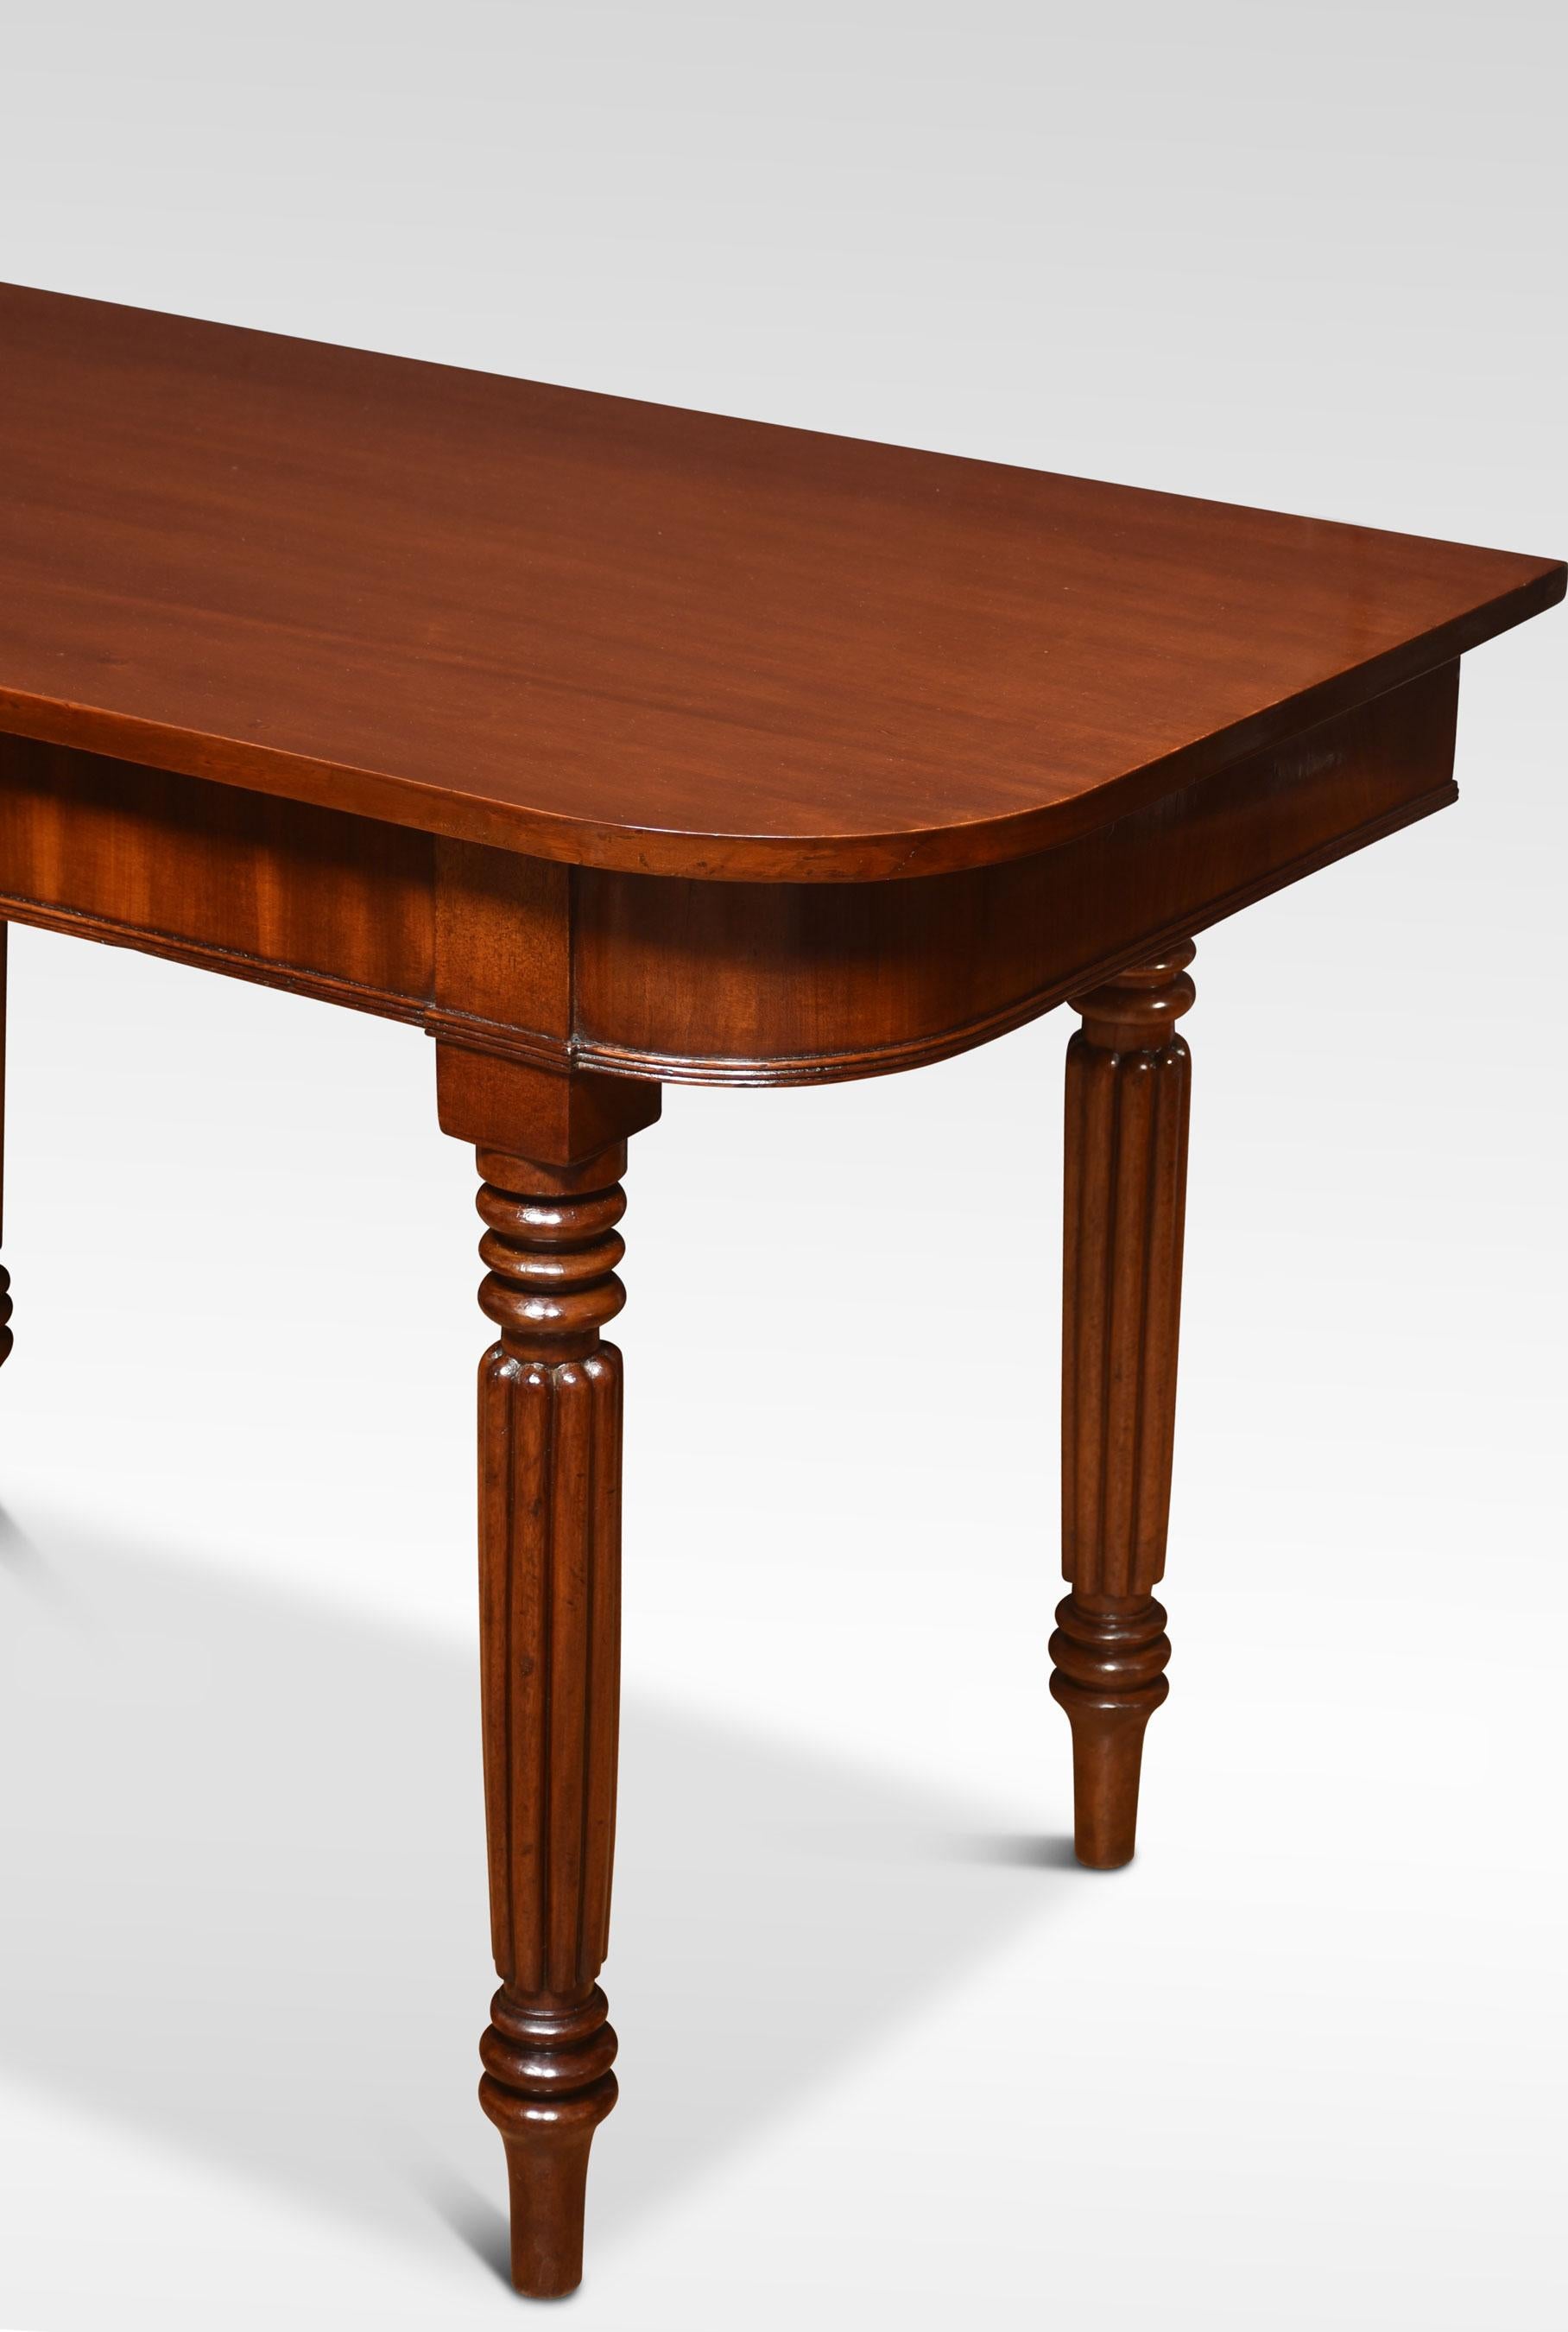 Pair of mahogany hall tables the rectangular top with rounded corners, above moulded freeze. Raised up on turned and reeded tapering legs.
Dimensions
Height 30 Inches
Width 49 Inches
Depth 24.5 Inches.